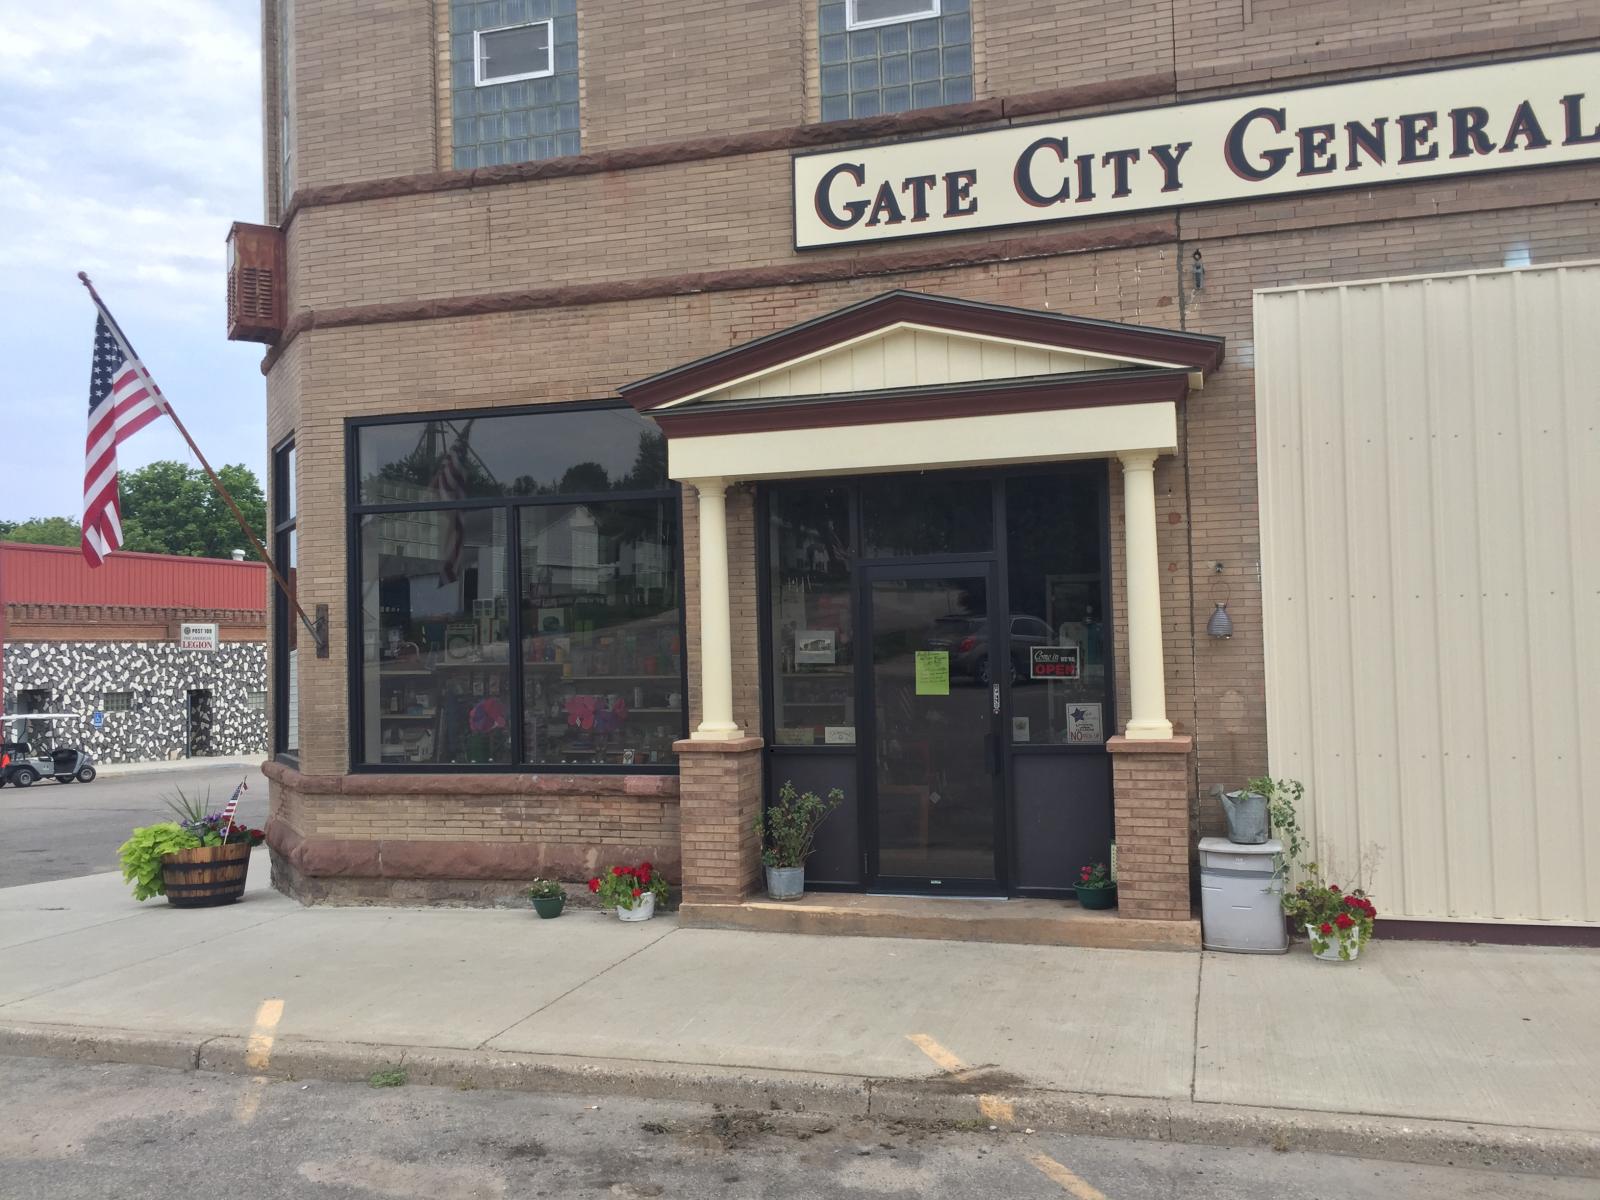 Gary Gate City General's Image